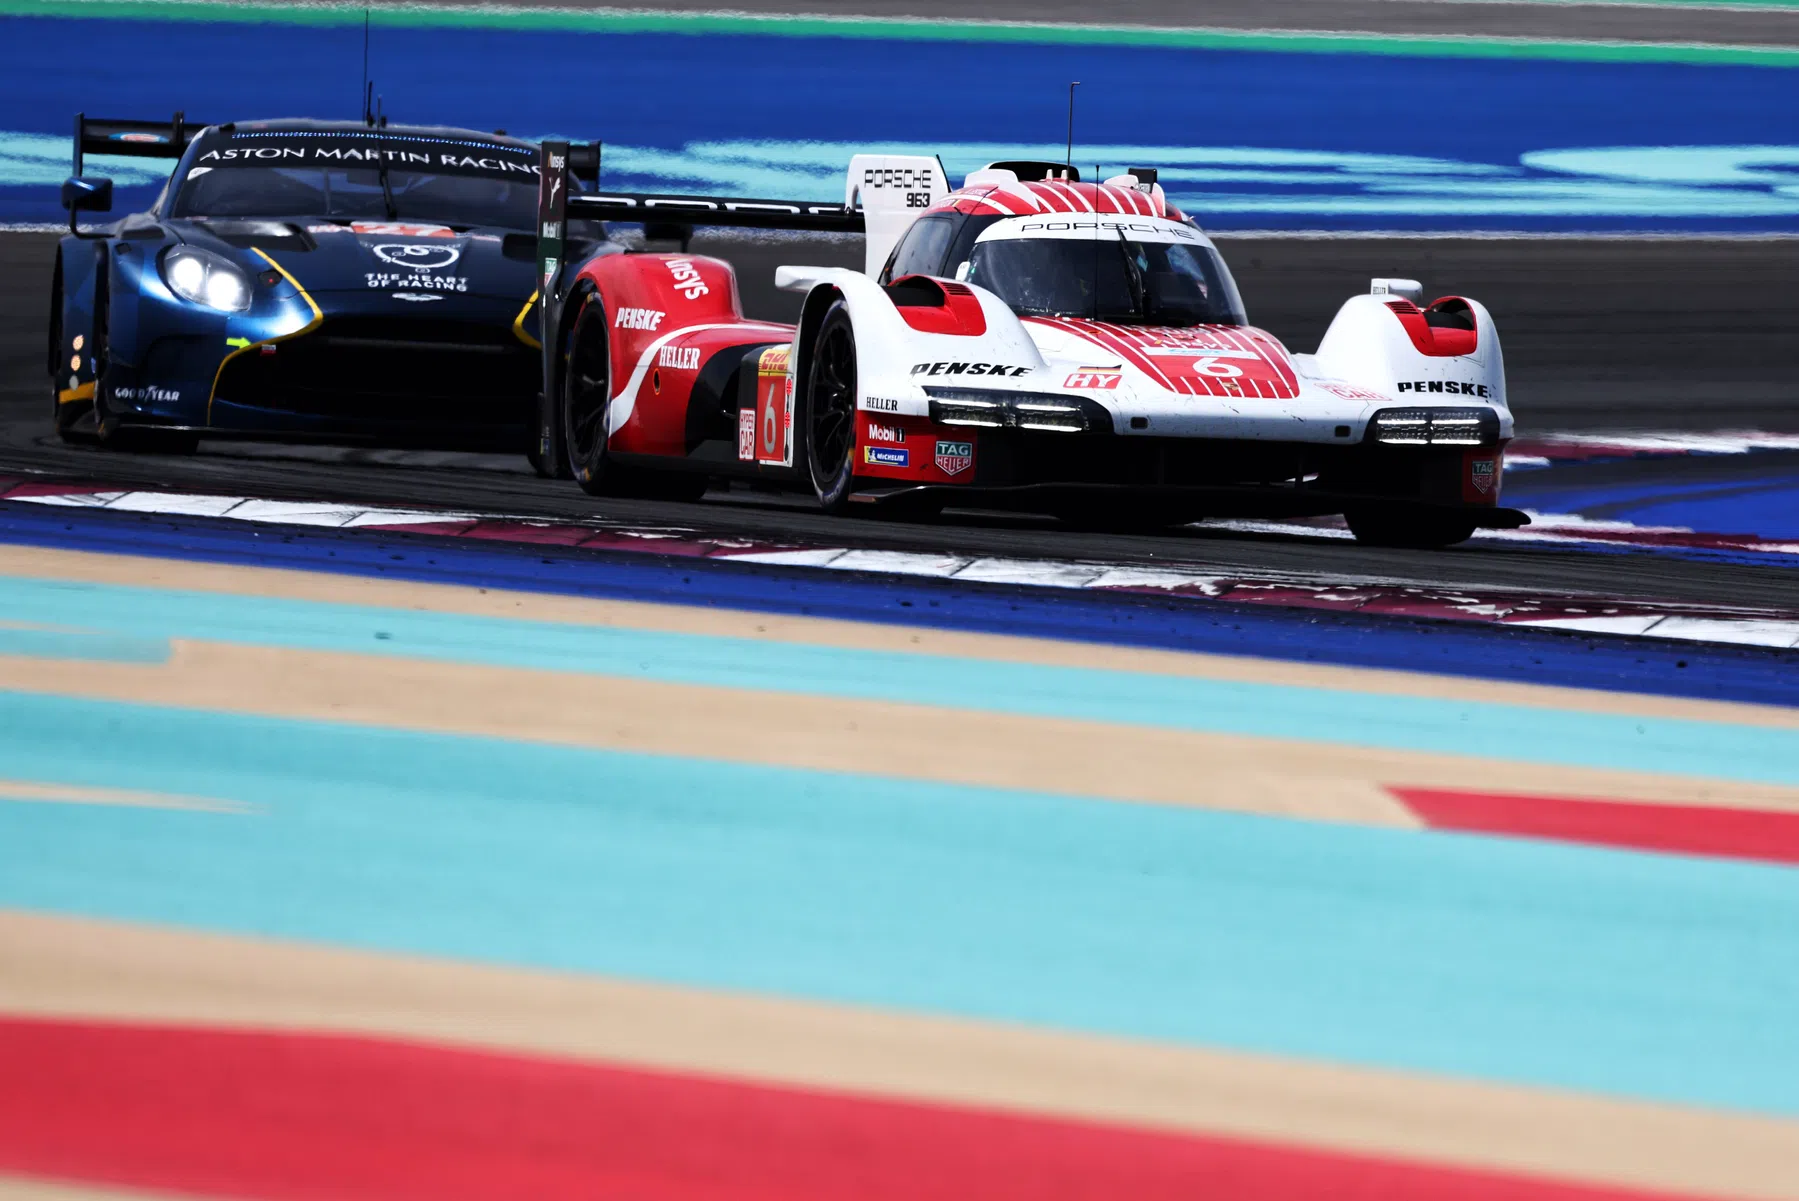 Three Porsches on the podium, drama for Vergne and Peugeot